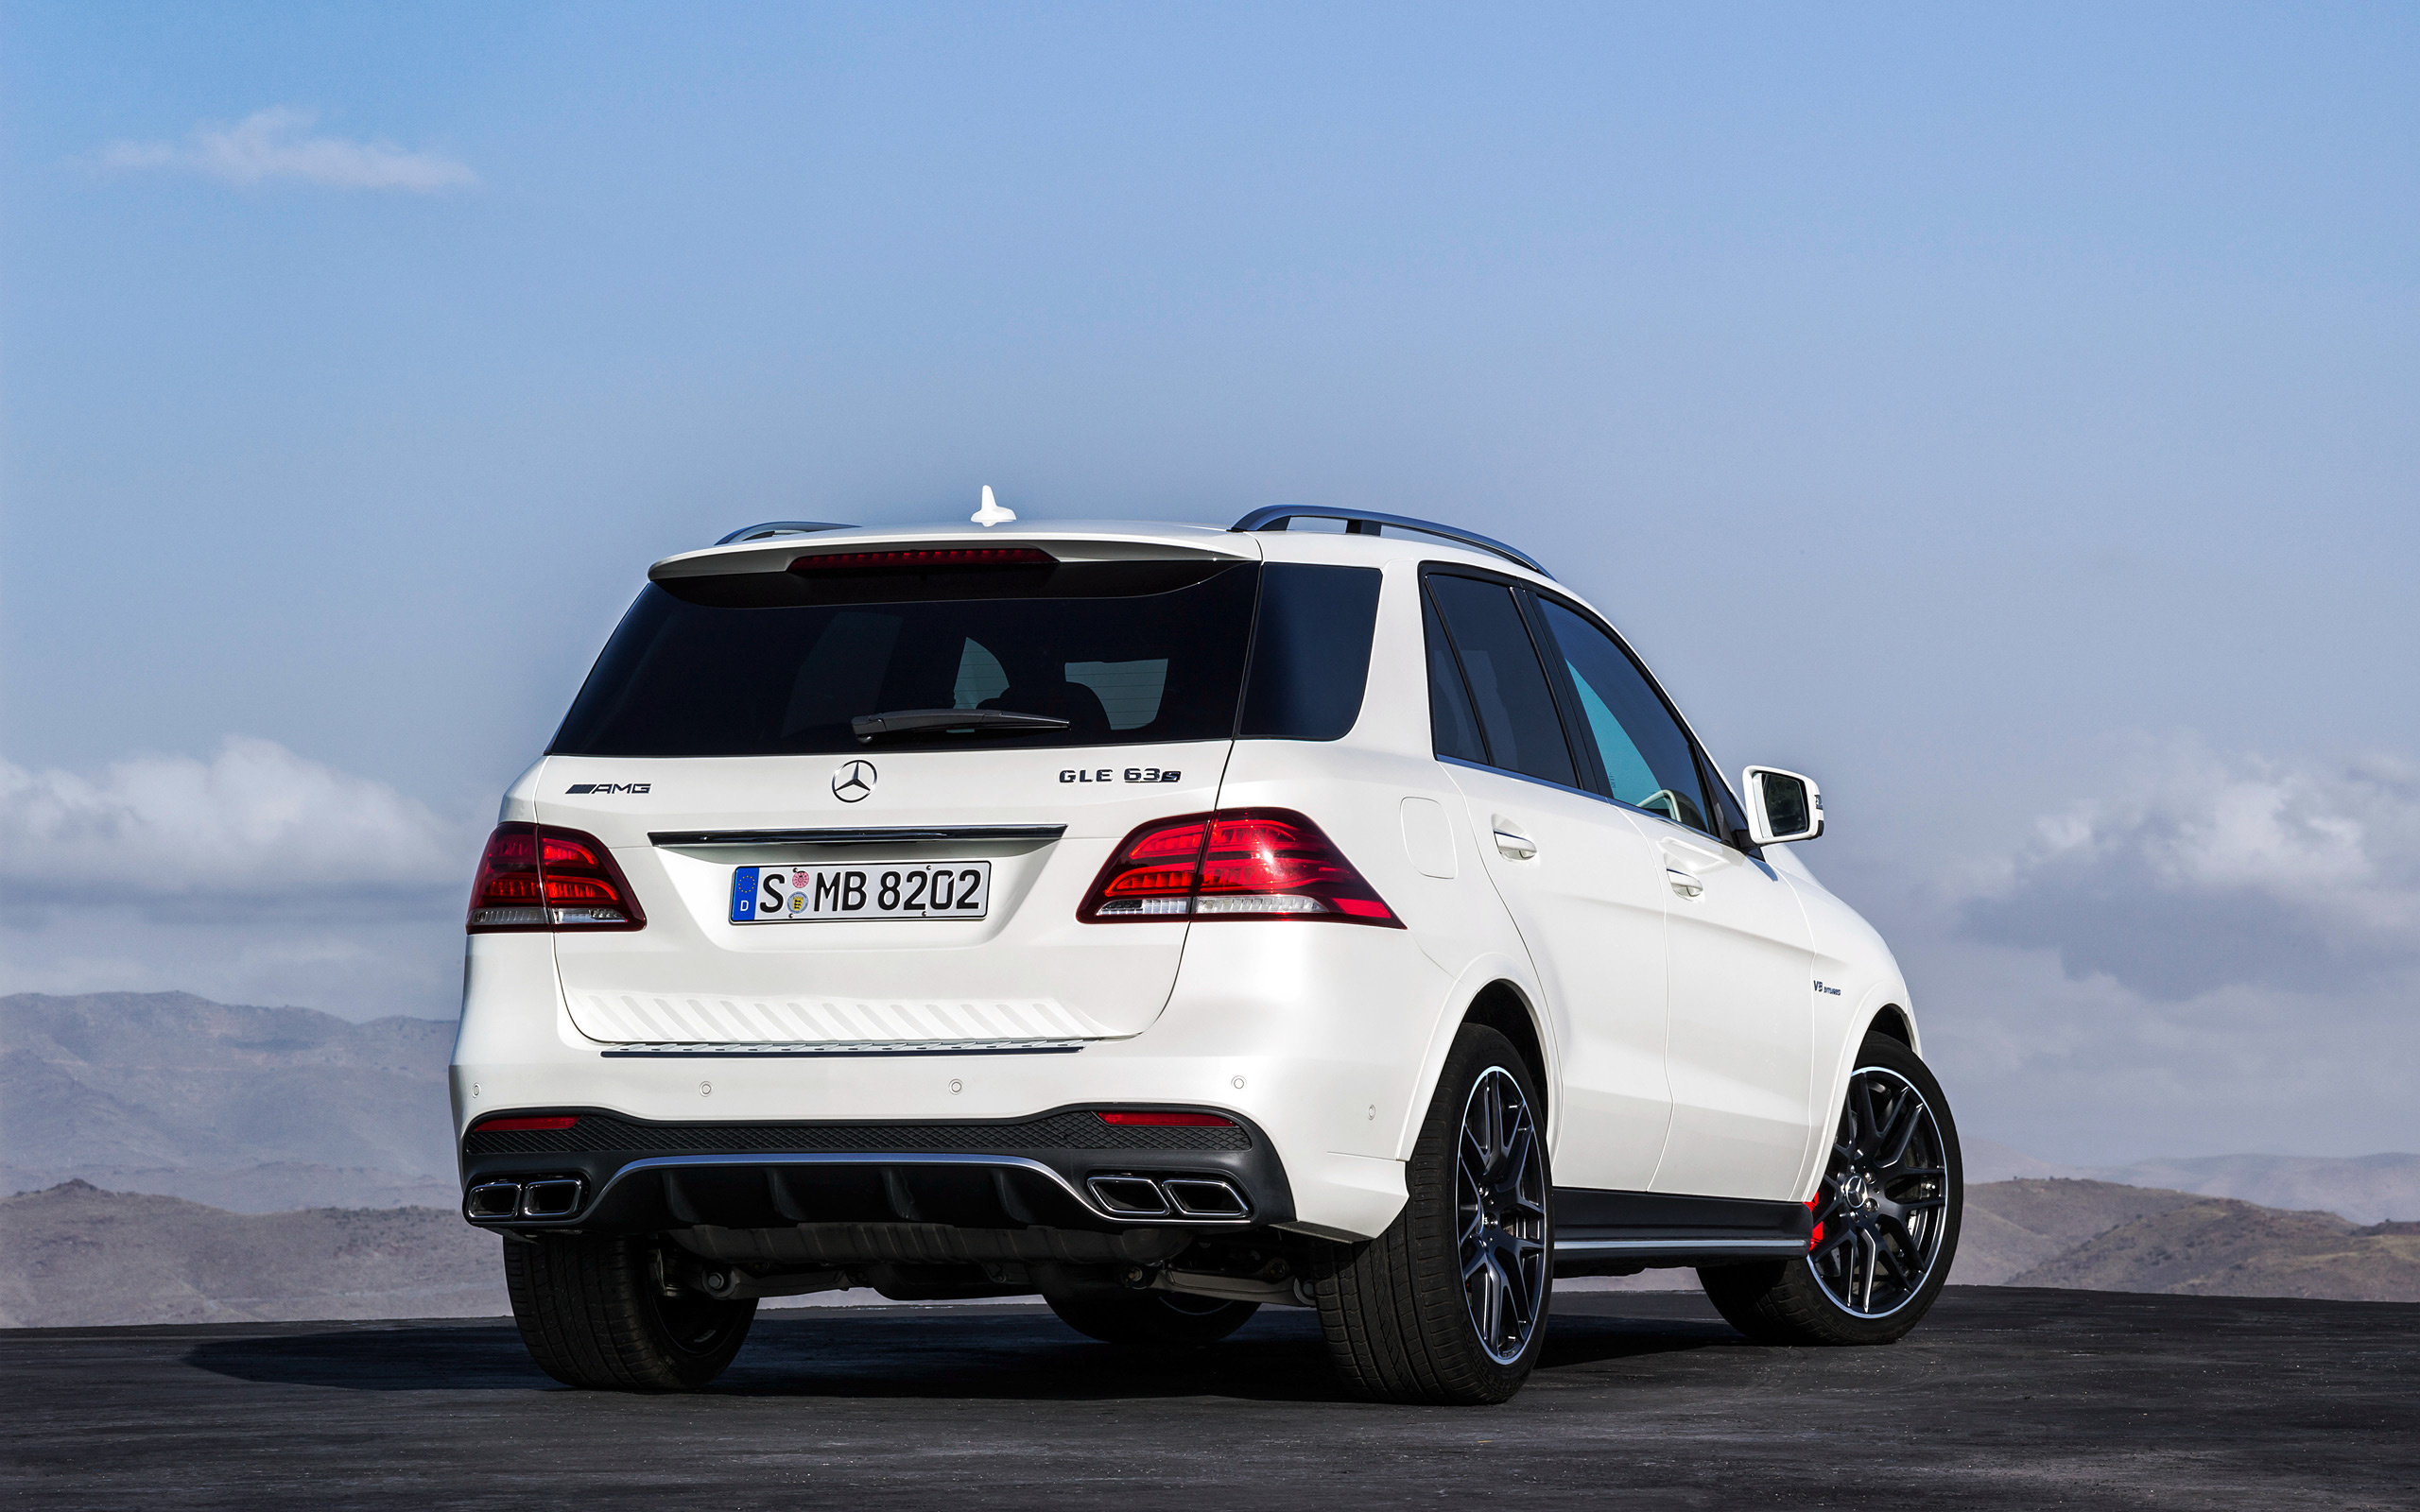 Mercedes-Benz GLE, AMG power, Luxurious and powerful, Unmatched performance, 2560x1600 HD Desktop